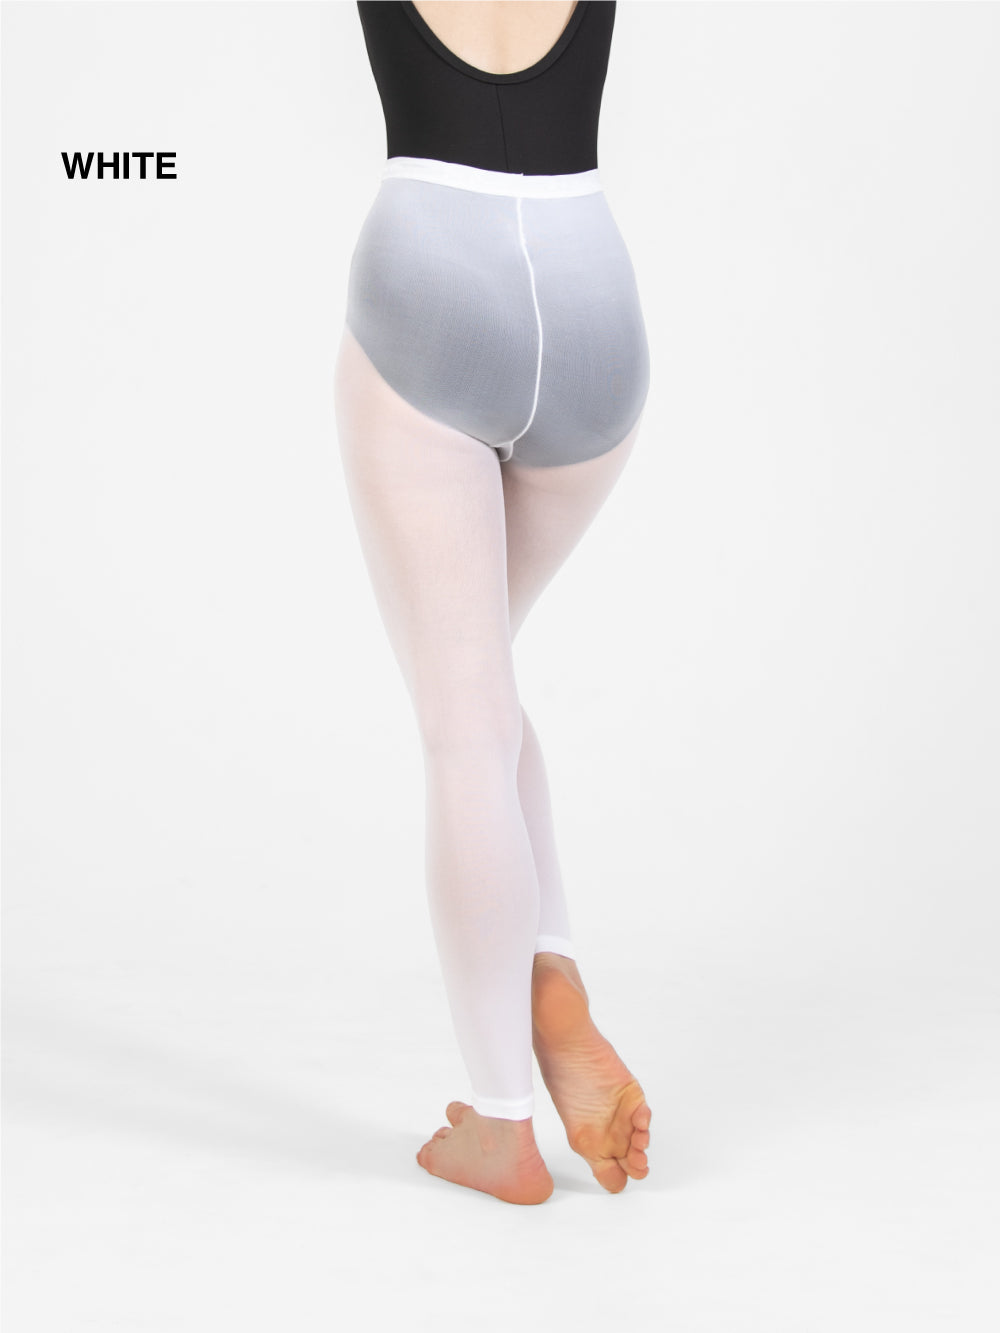 Large / X-Large, Suntan) - Body Wrappers Footless Tights : :  Clothing, Shoes & Accessories